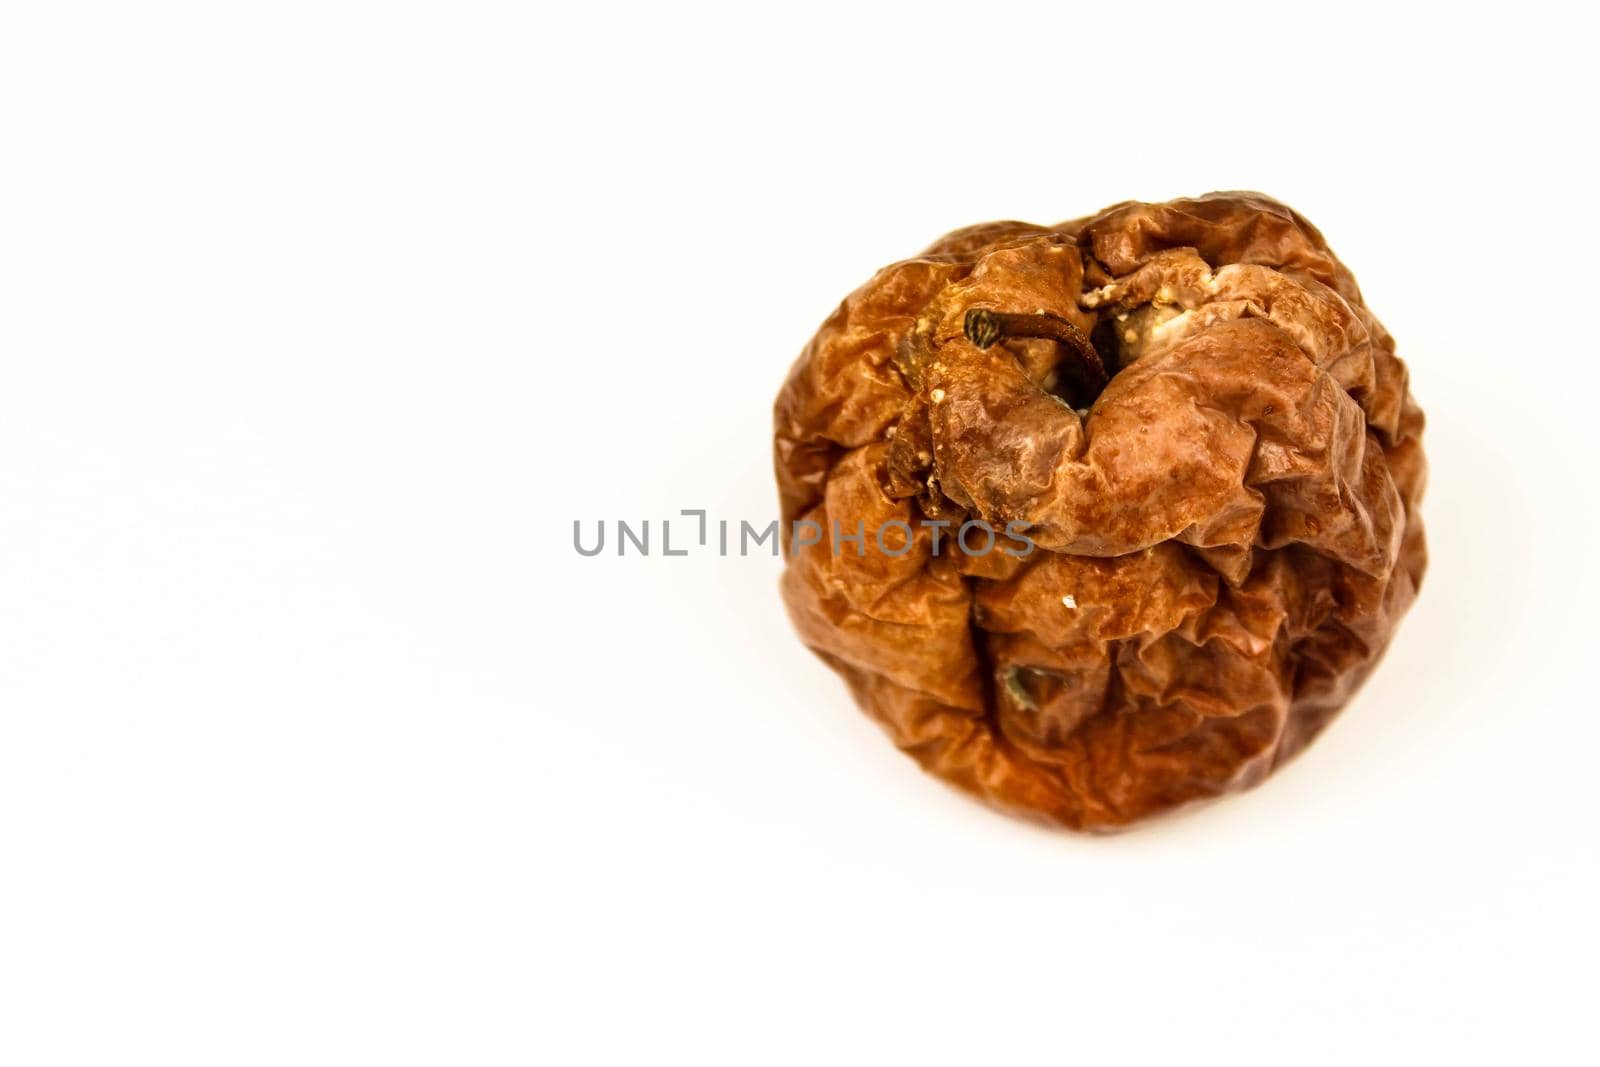 Old rotten apple with large DOF on white background by JuliaDorian